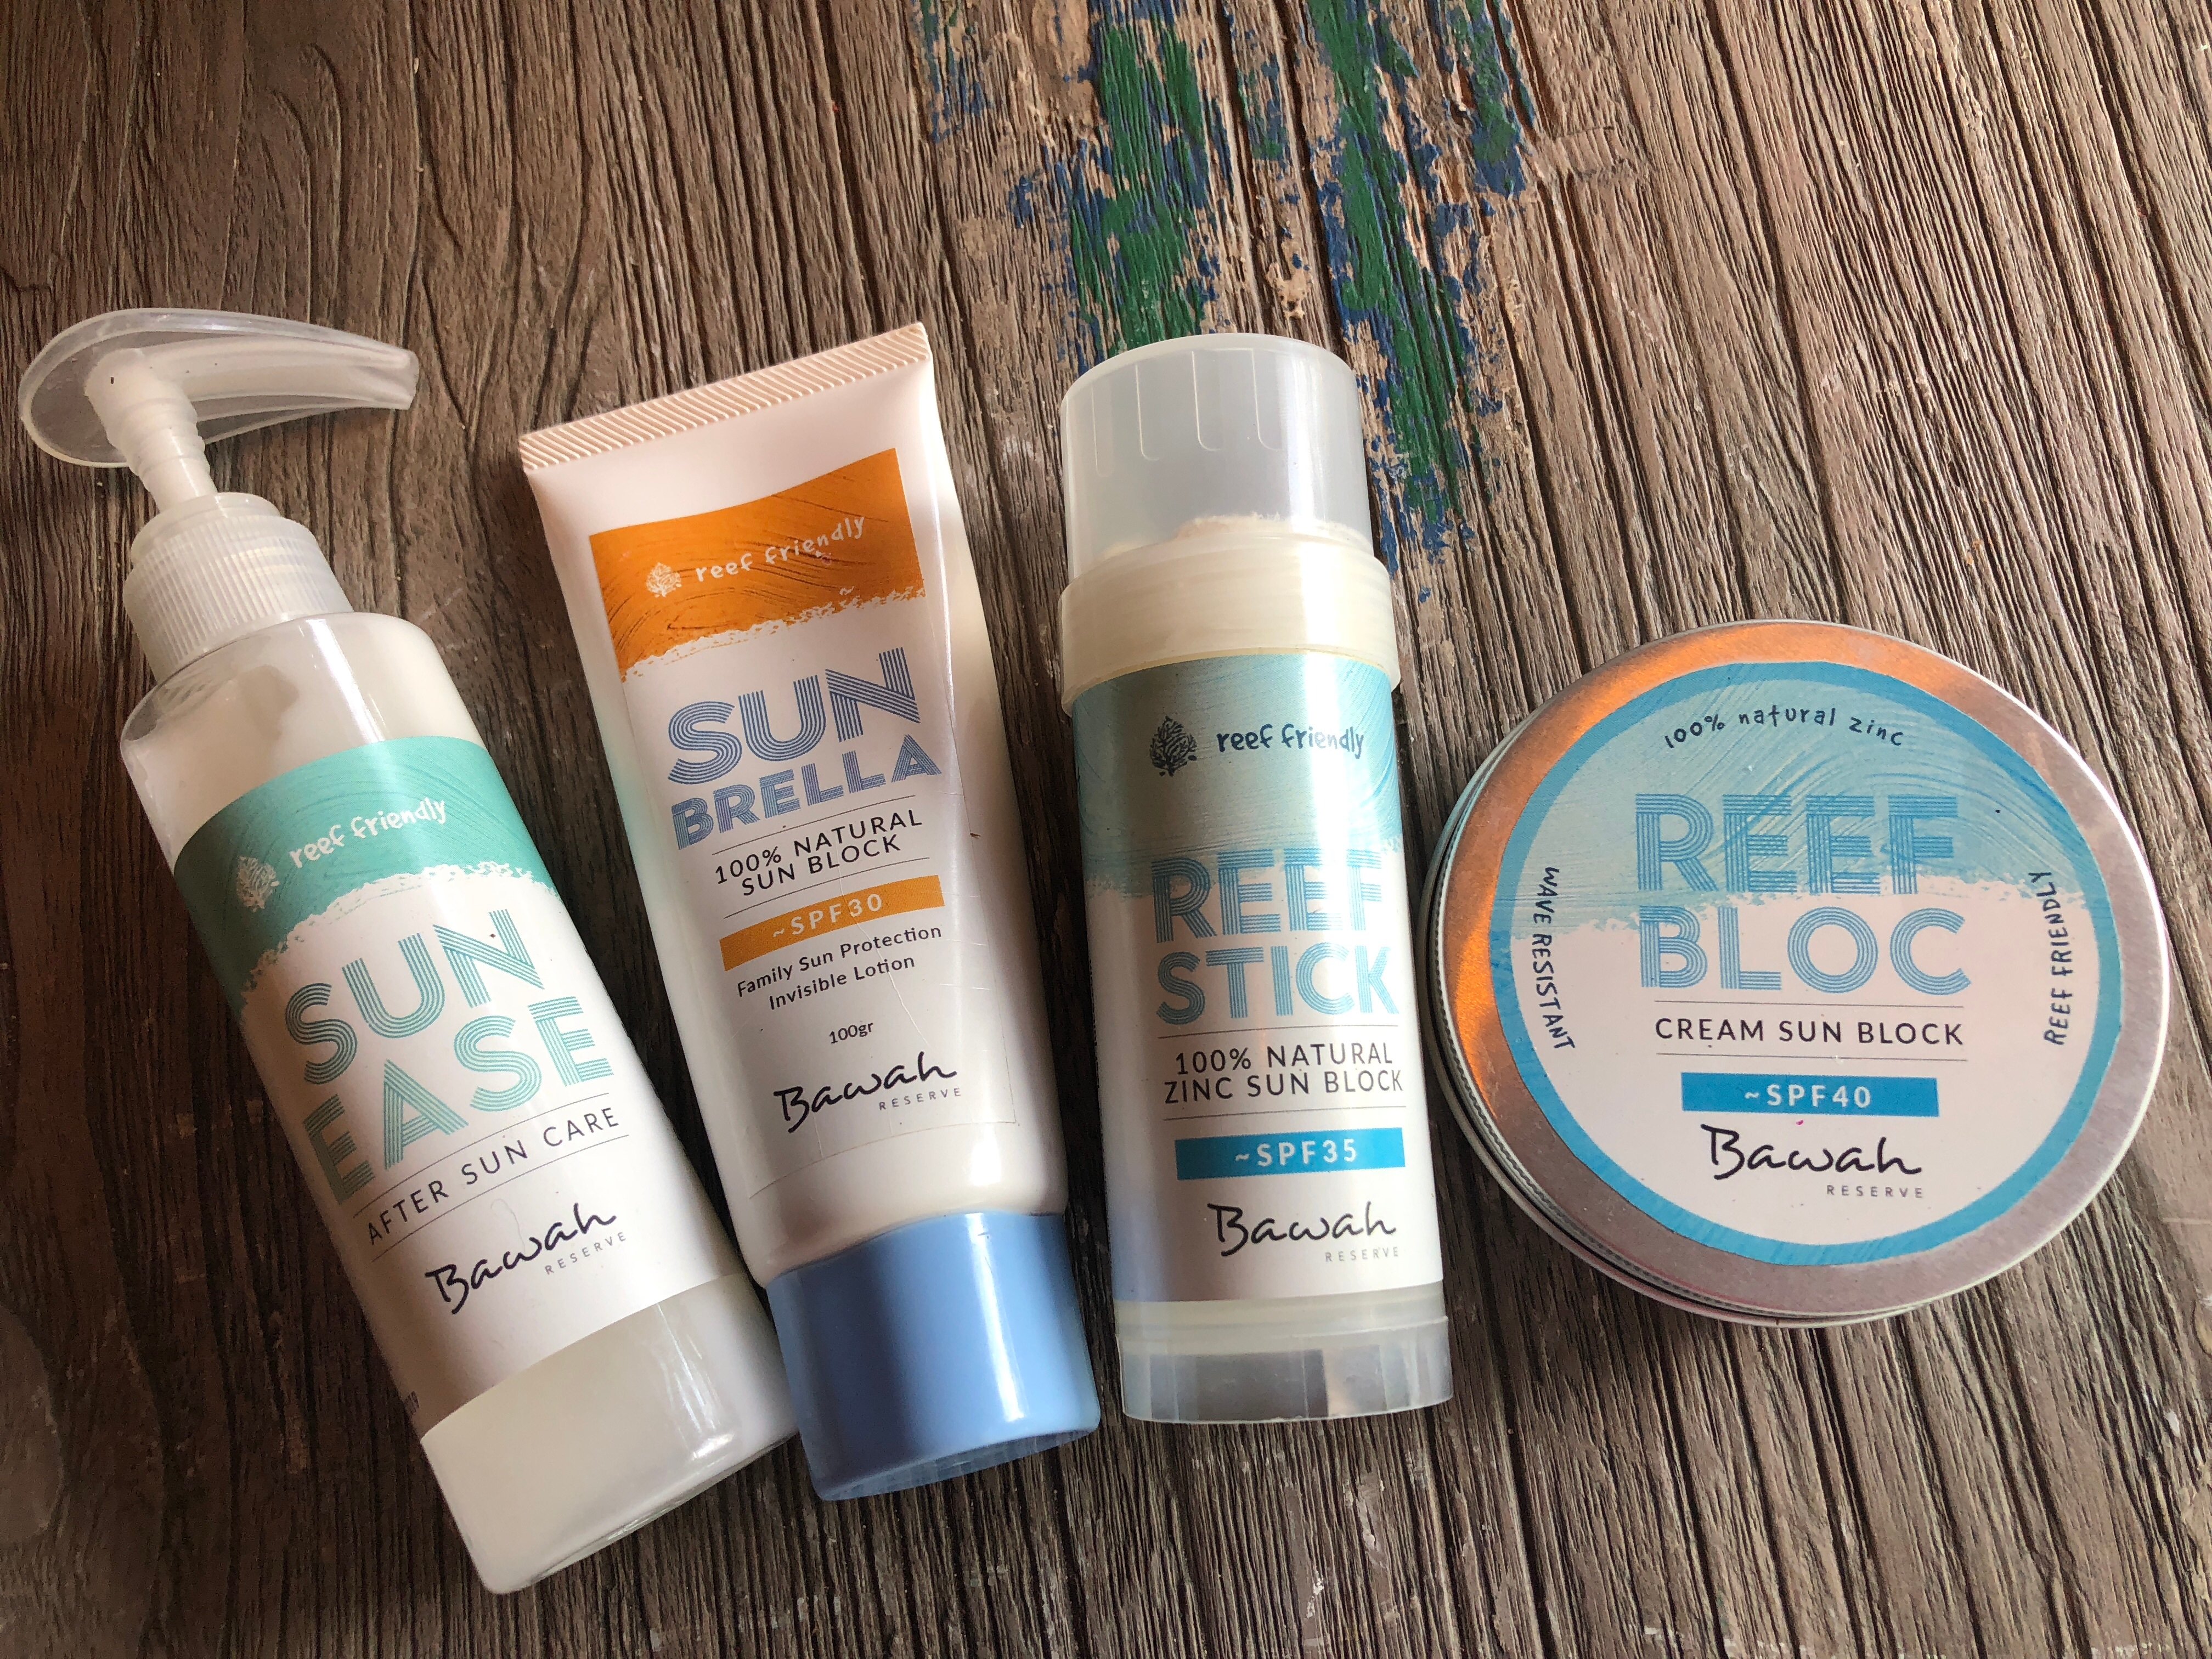 Reef friendly sunscreens only please!